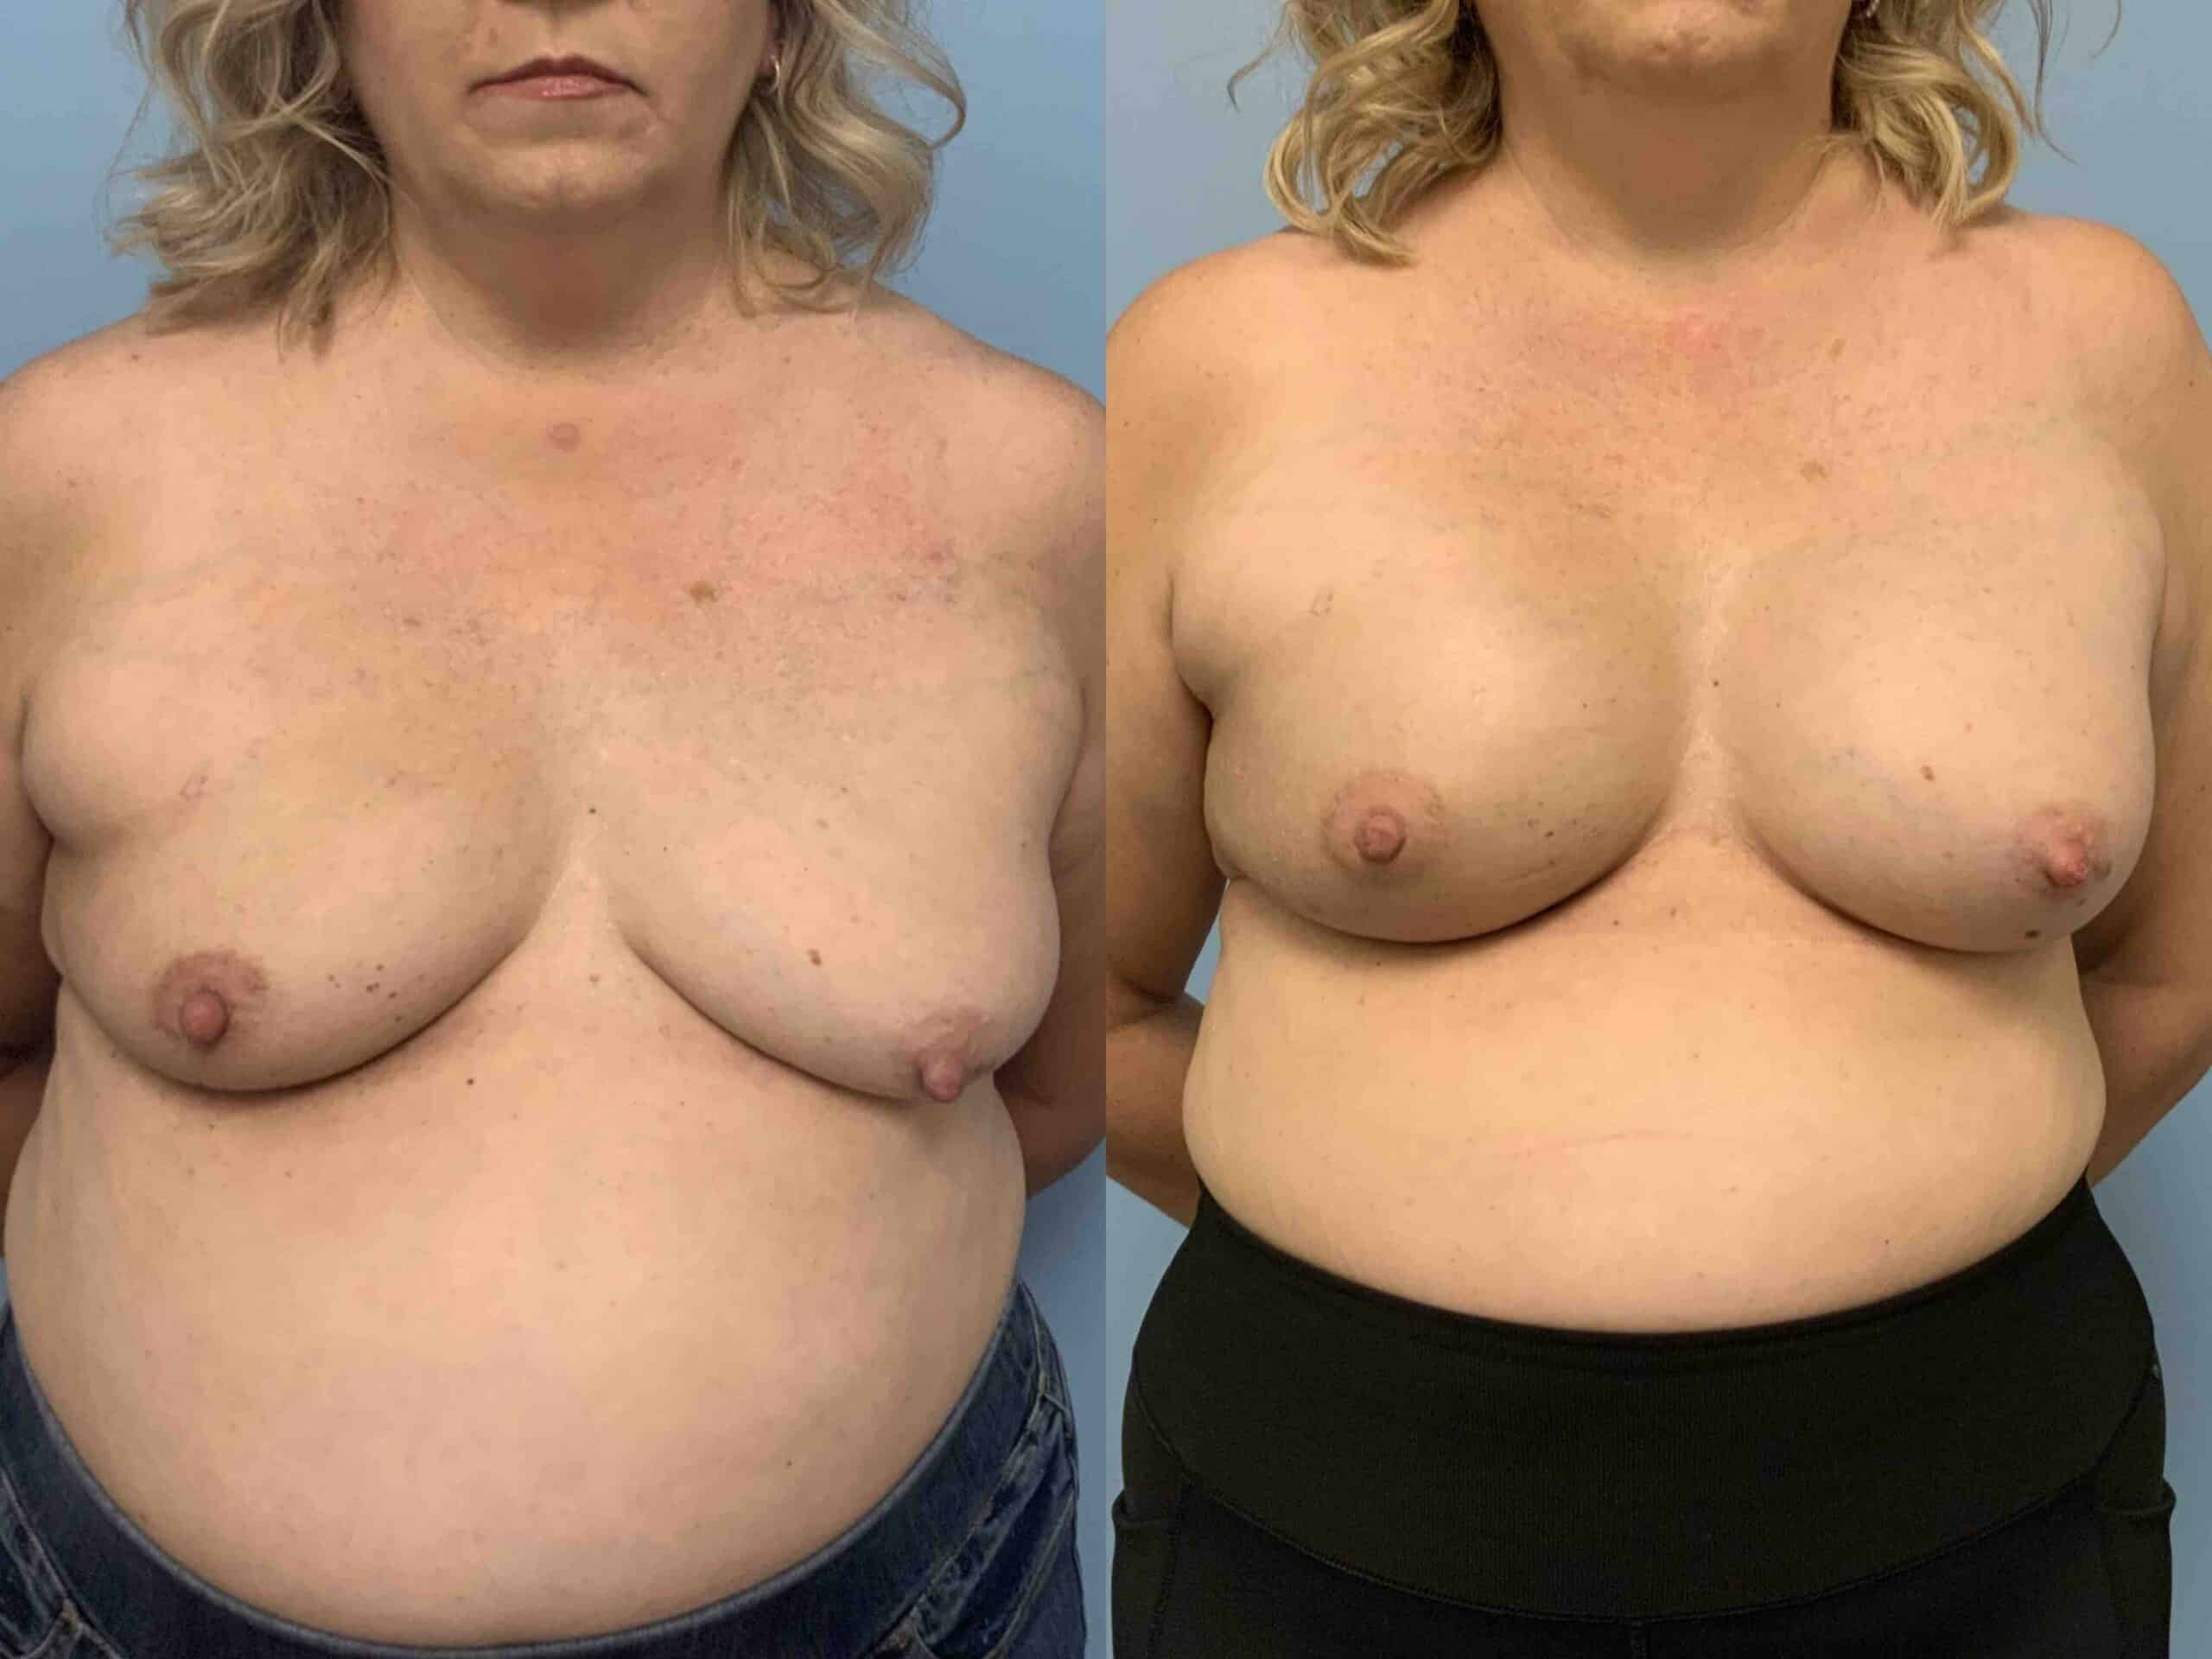 Before and after, 2 mo post op from Right Irradiated Breast Reconstruction, B/L Mastopexy, B/L Breast Augmentation with Alloderm performed by Dr. Paul Vanek (front view)